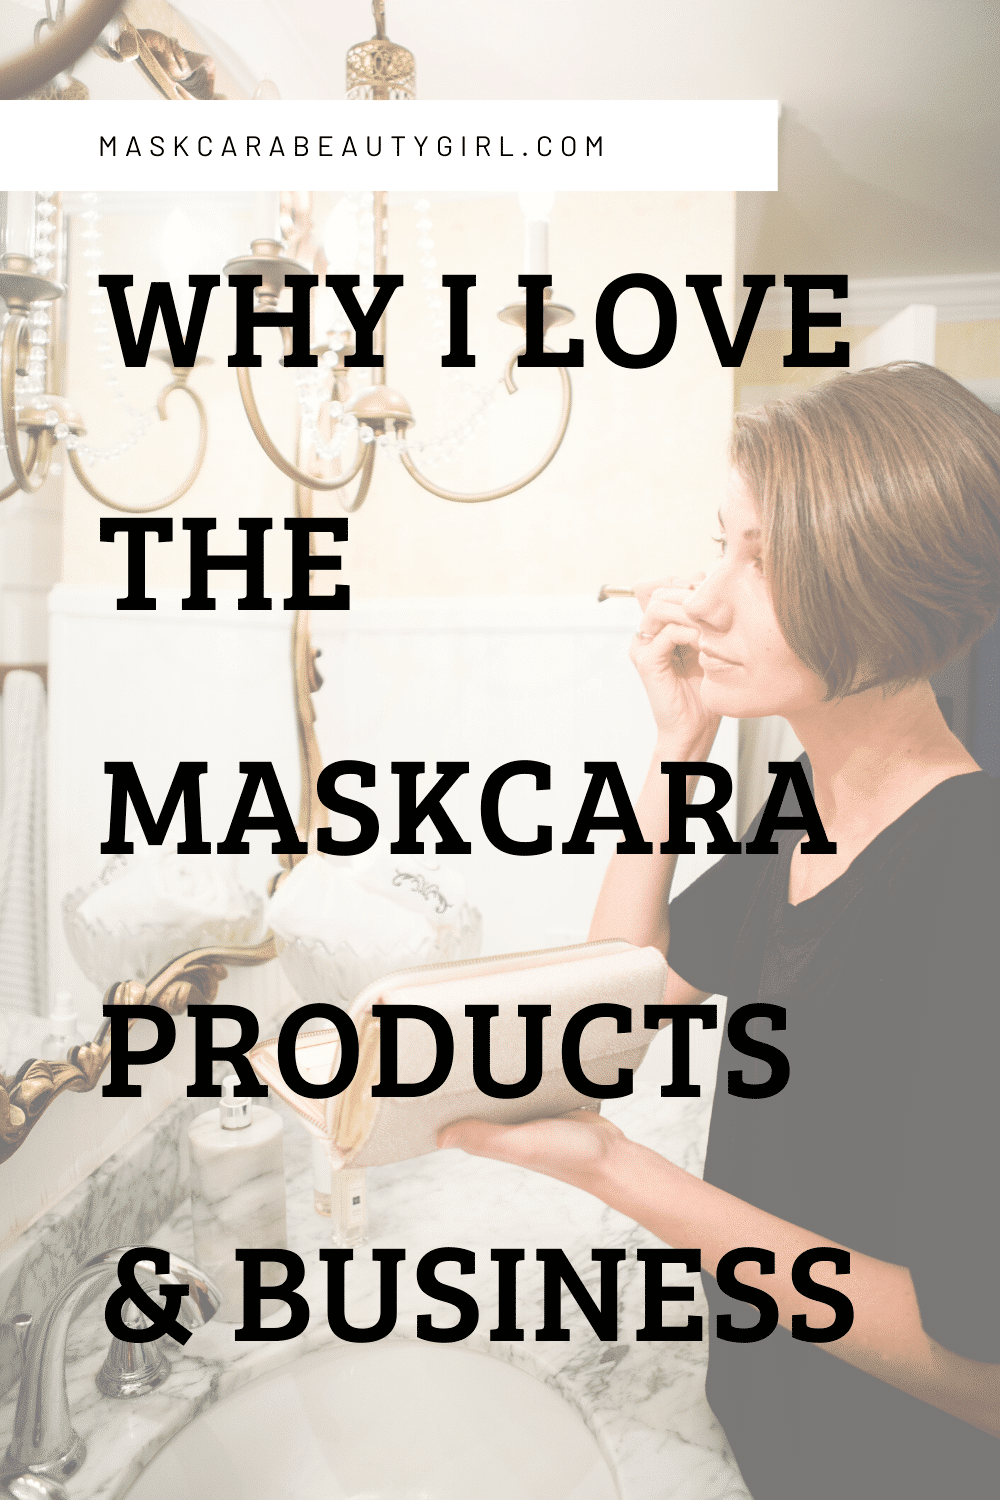 My Maskcara Why: Why I love the products and the business!